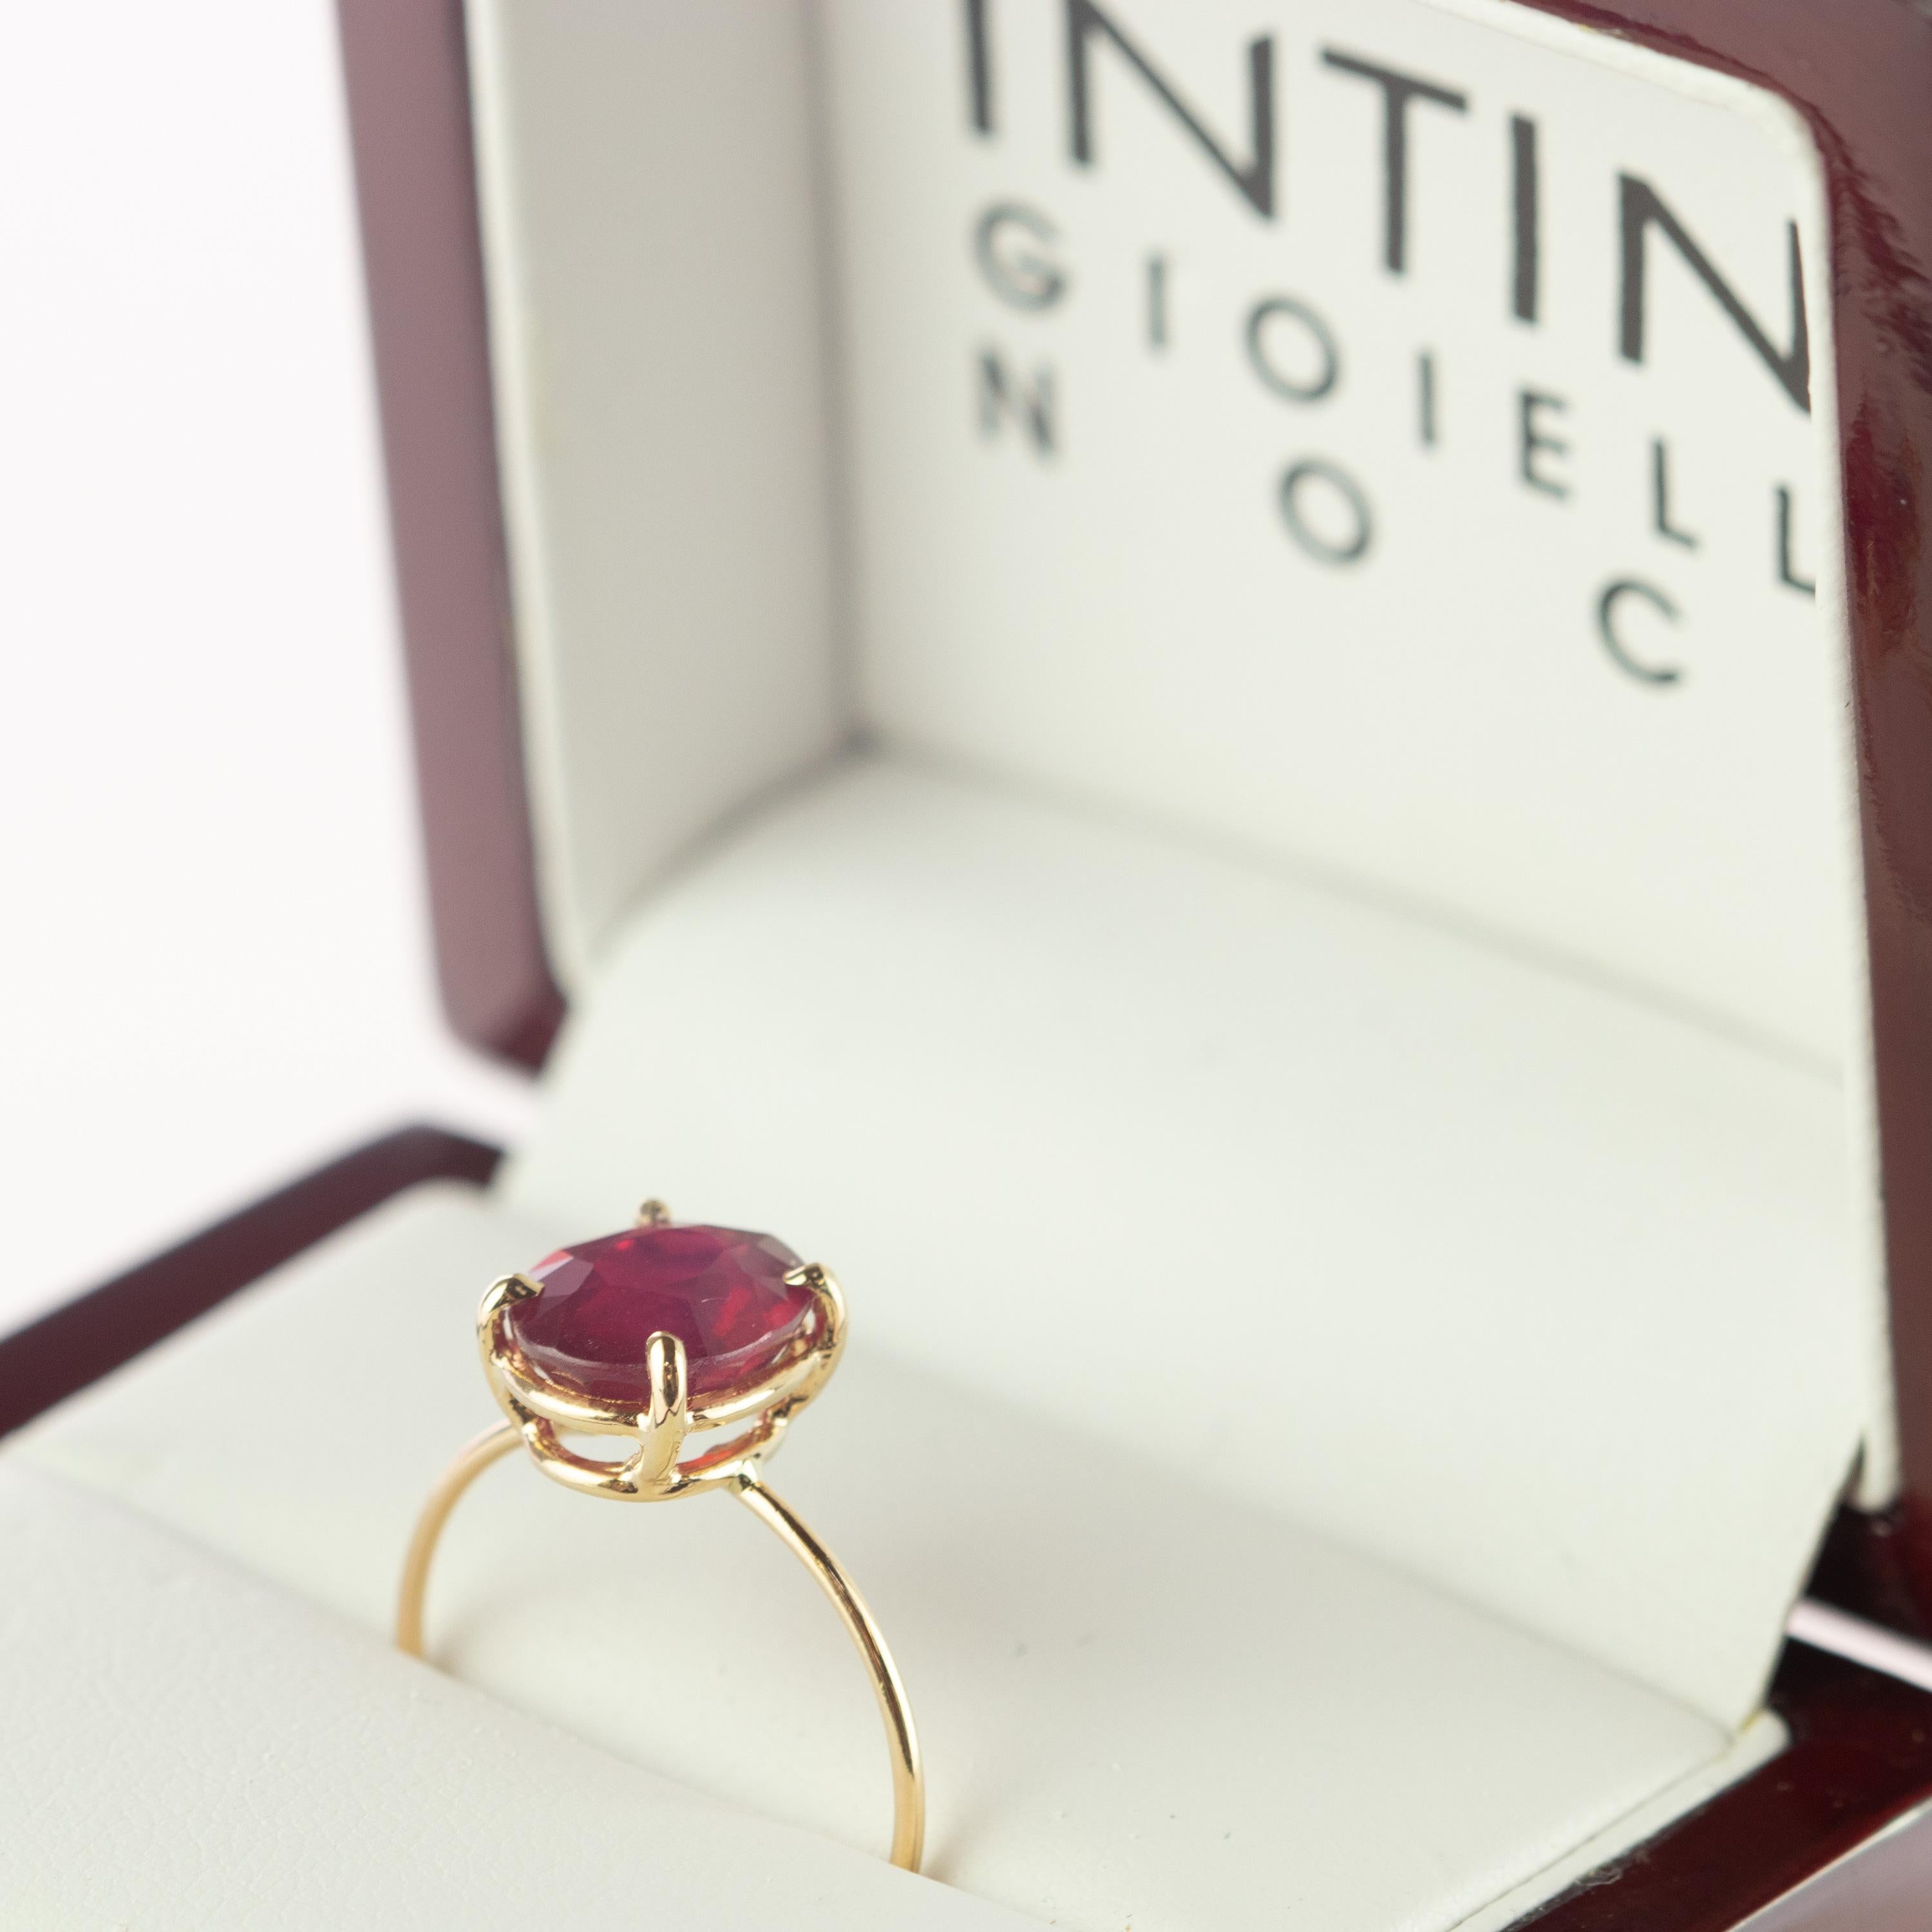 This extraordinary faceted ruby (2.5 carats) ring. This artwork is for a fresh, young and modern woman. All artfully set and crafted in 18k yellow gold to create this stunning piece of jewelry.  Handmade band ring. Summer and chic jewel
 
The ruby